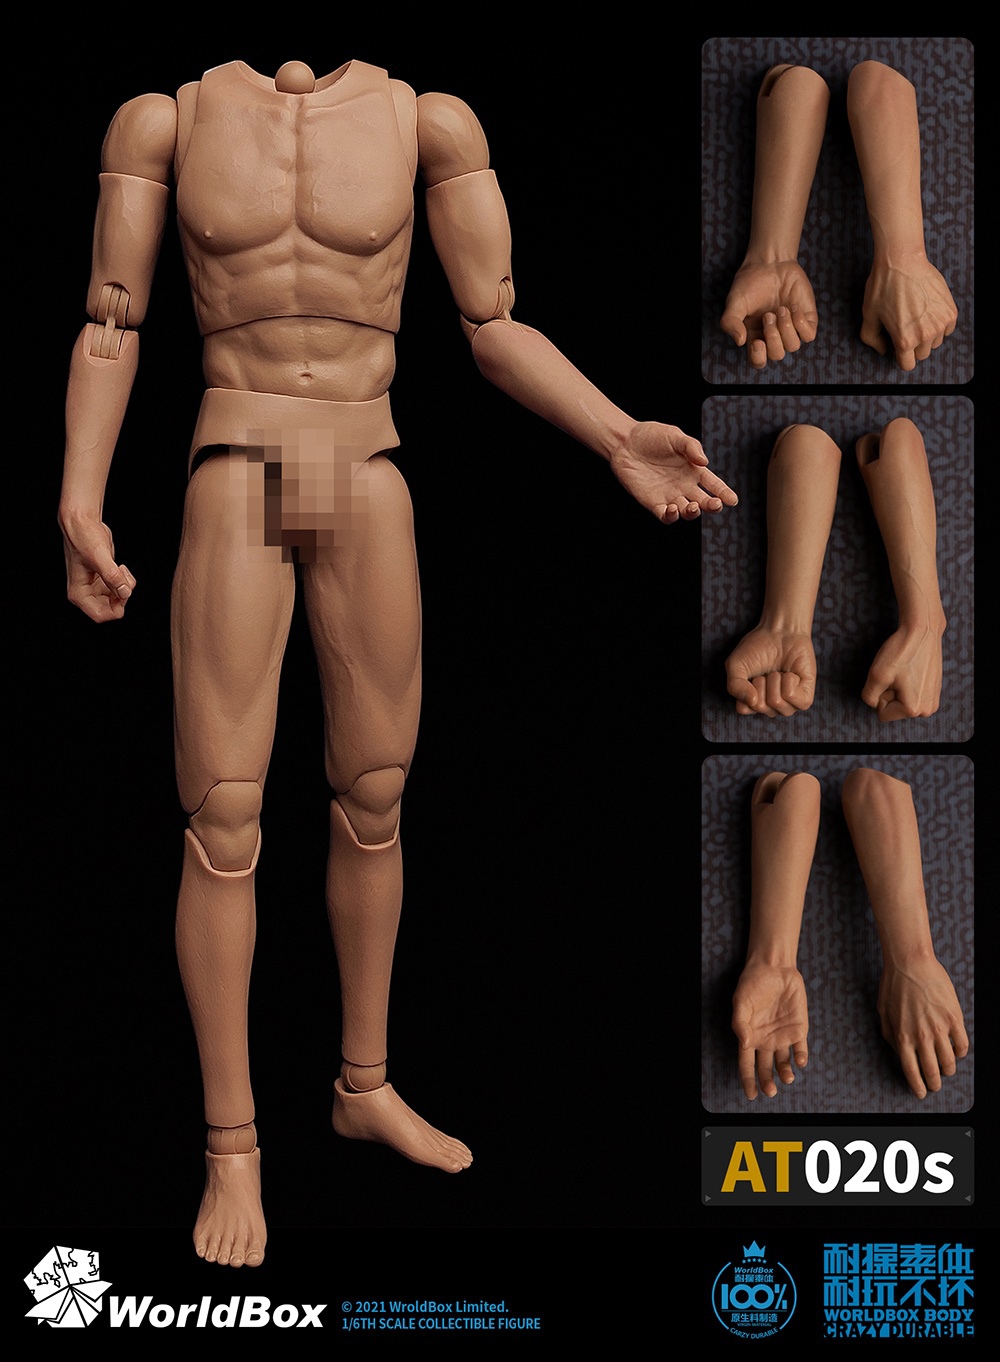 Worldbox - NEW PRODUCT: Worldbox: 1/6 AT020S 1/6 Scale Body with forearms 10460512